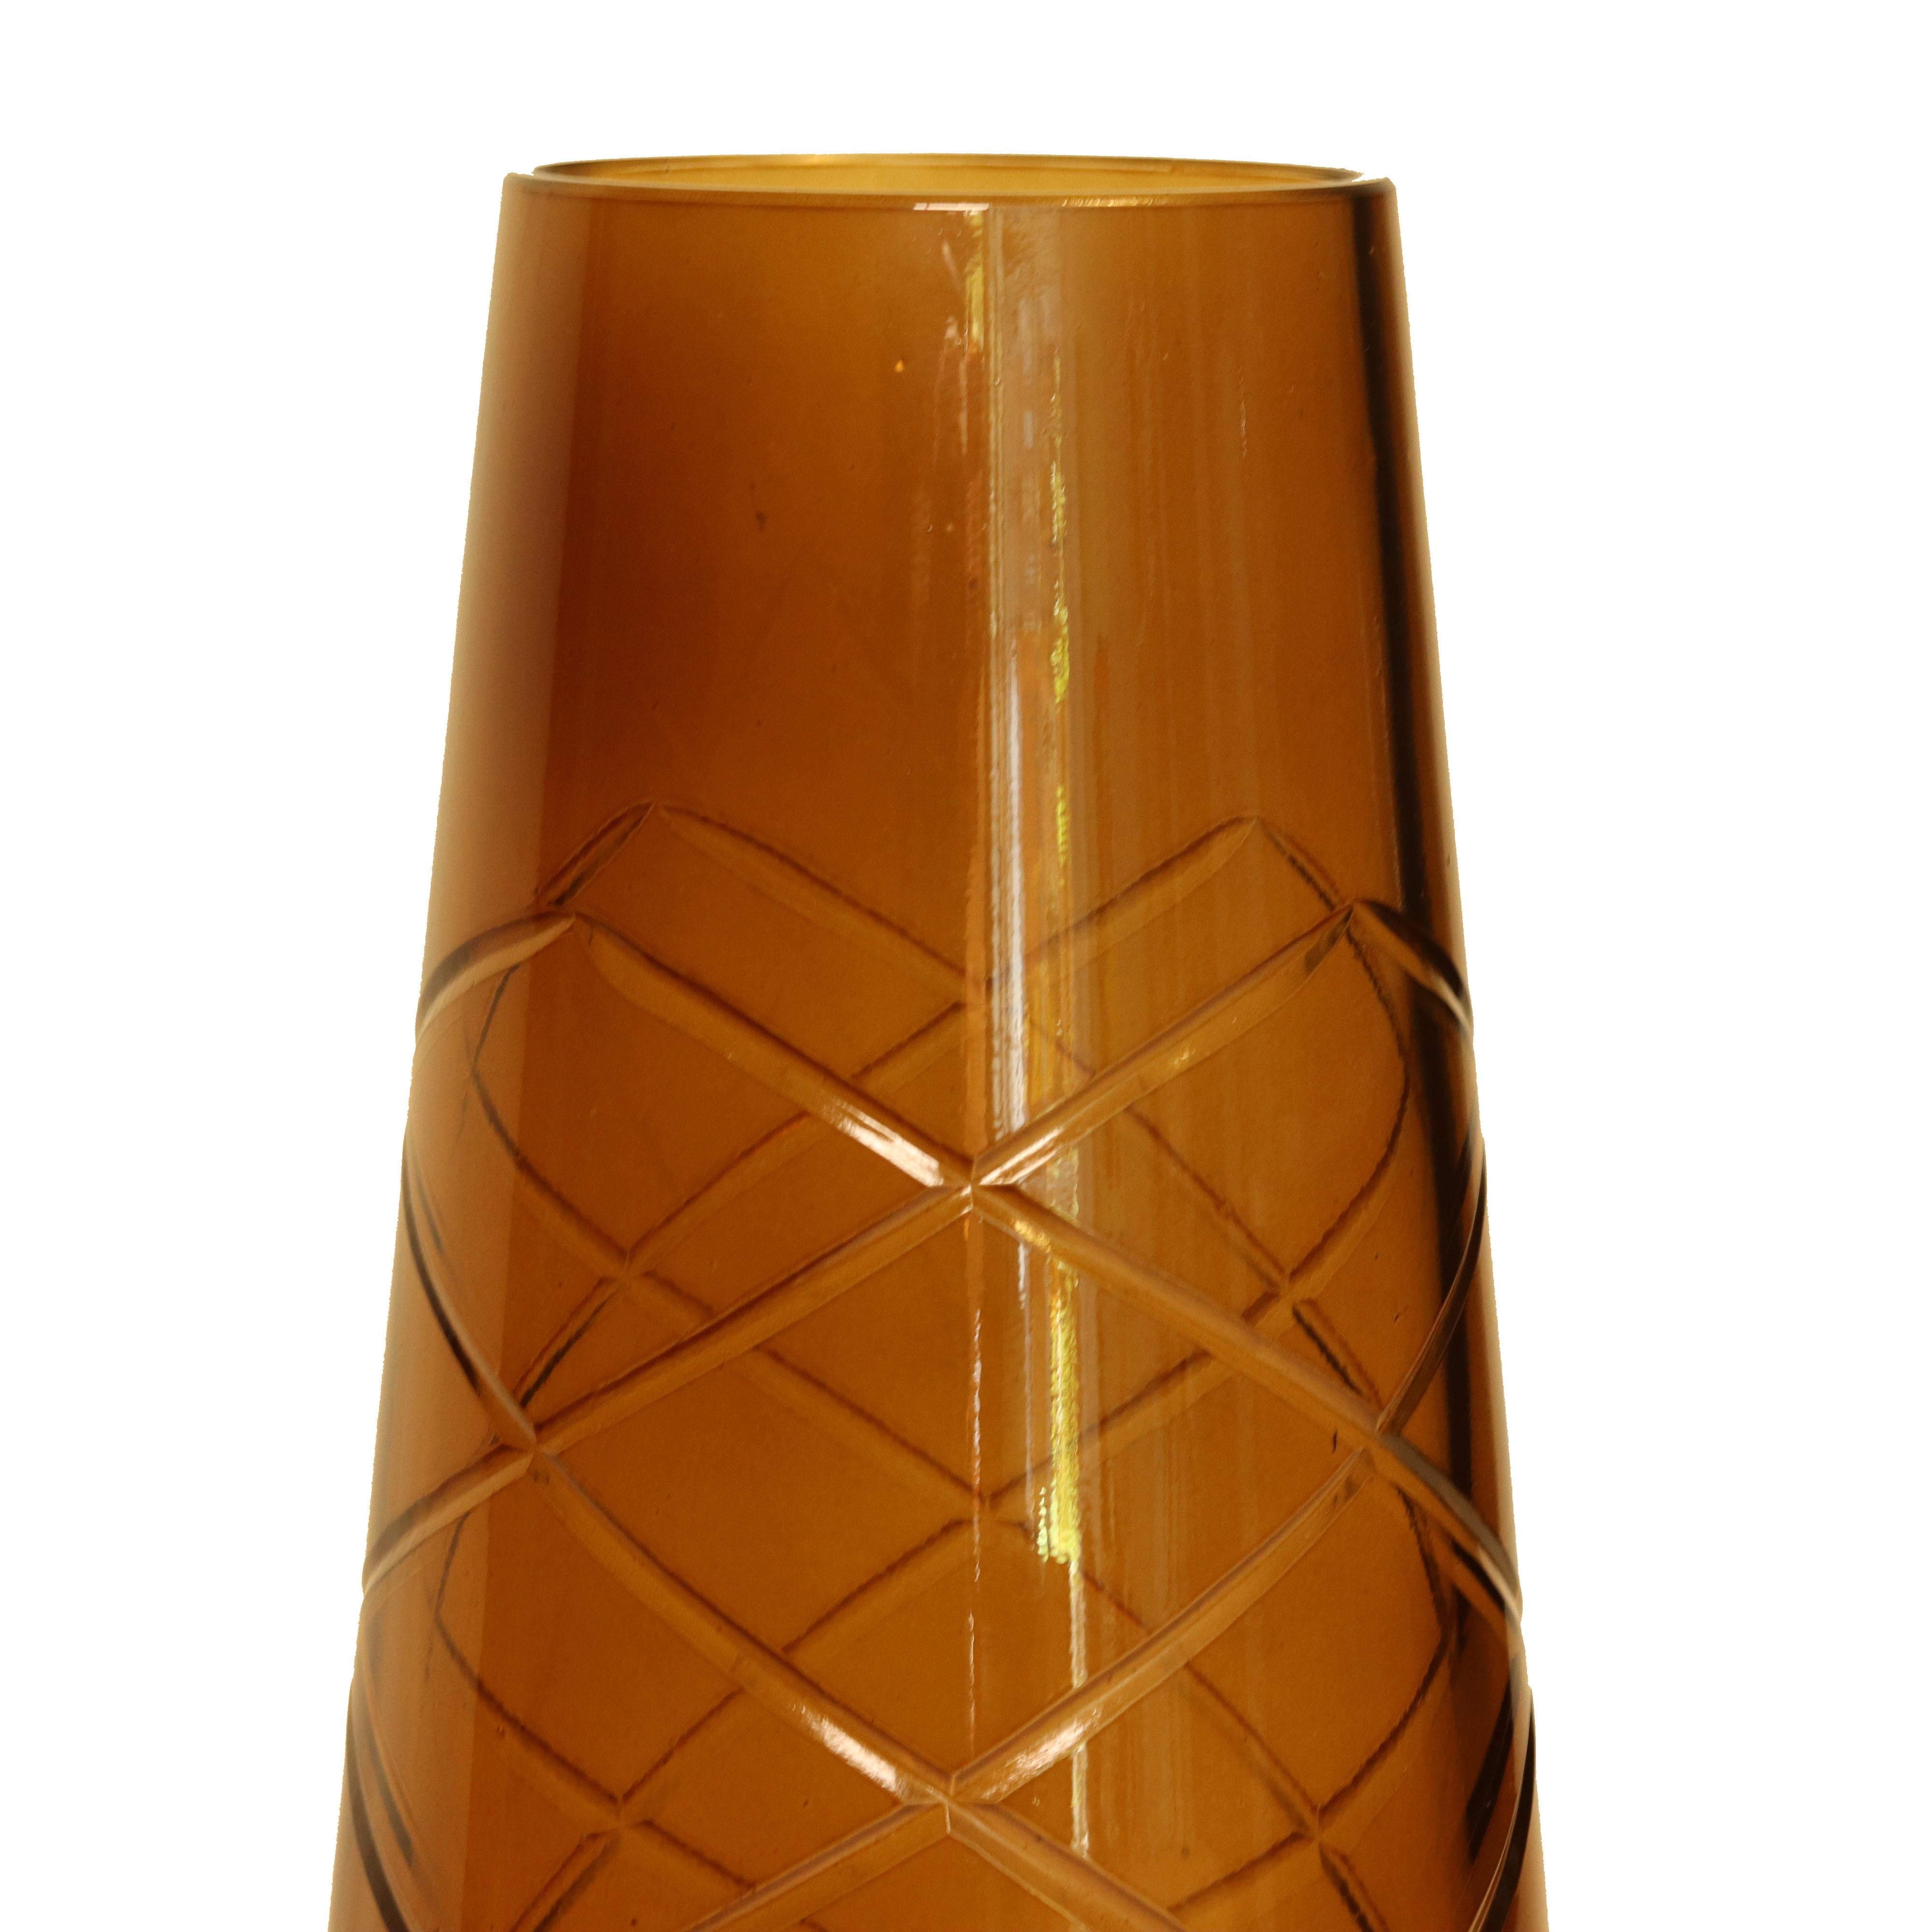 The Girata (Revolve in English) Murano Vase is made entirely in an original way according to the Murano blown glass technique. 

All our glass works are done exclusively by freehand; therefore, each glass element is a unique piece made on Murano